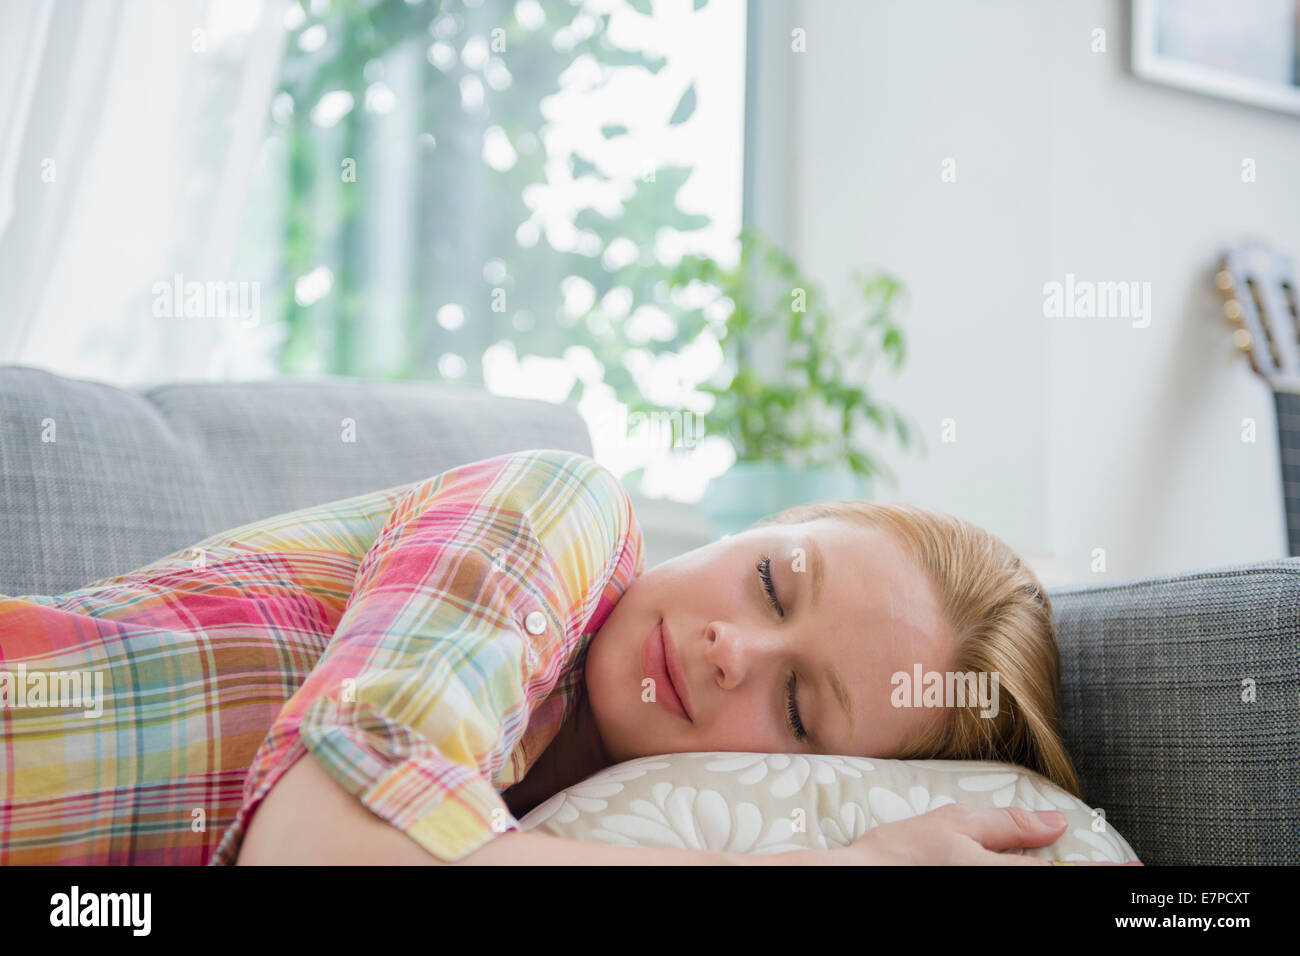 Young woman napping on sofa Stock Photo